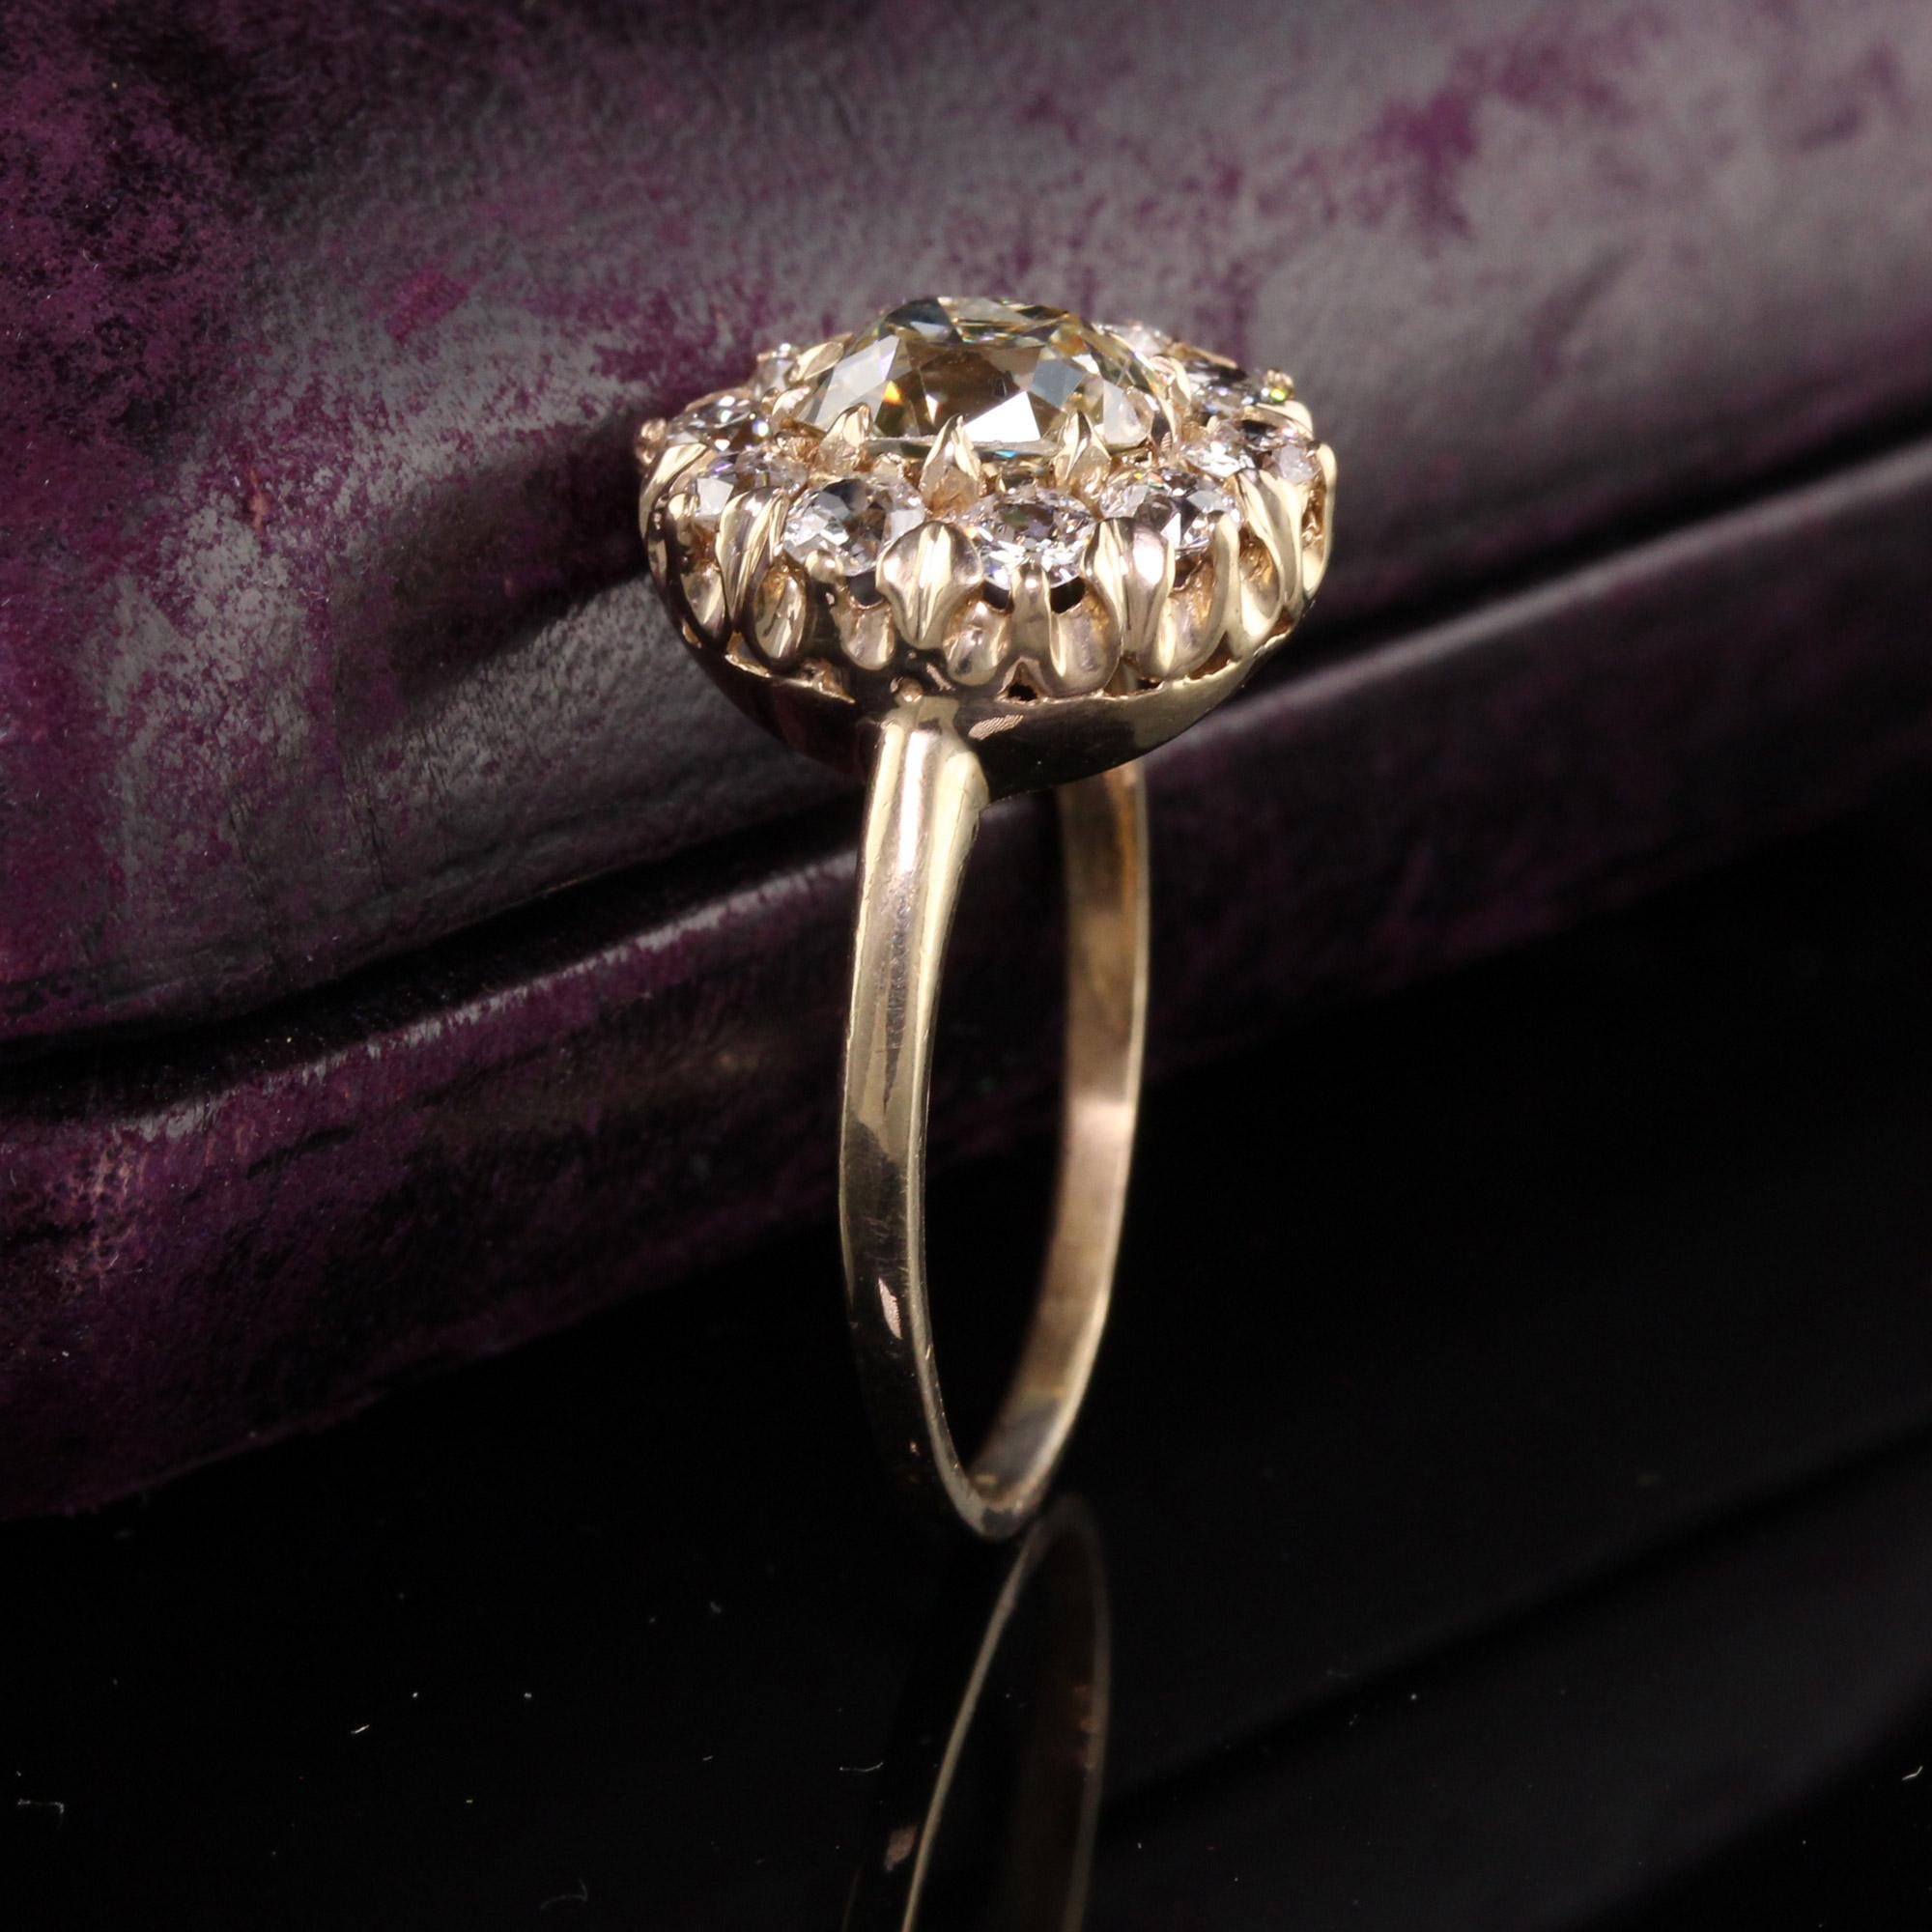 Beautiful Antique Victorian 14K Yellow Gold Old Mine Cushion Cut Diamond Engagement Ring. This stunning engagement ring features a beautiful long old mine cushion cut diamond in the center surrounded by old european cut diamonds going around